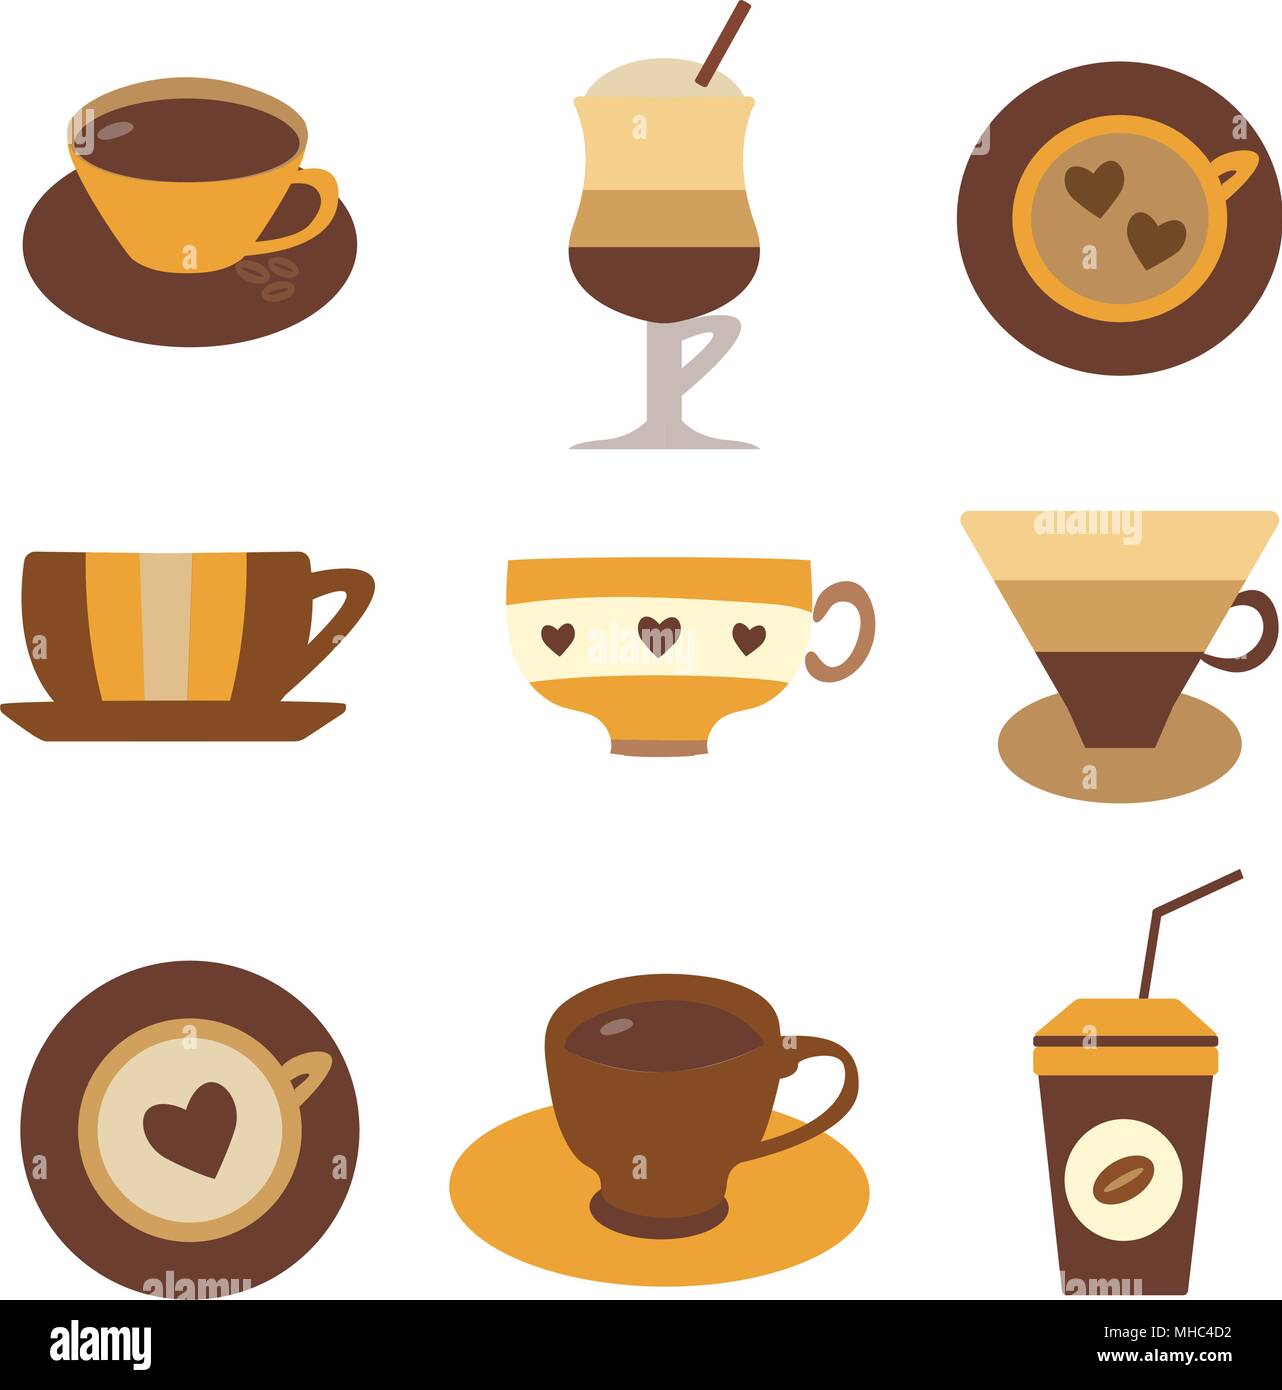 https://c8.alamy.com/comp/MHC4D2/coffee-tee-and-hot-chocolate-in-different-cups-colorful-mugs-for-hot-drinks-beverages-to-go-espresso-latte-cappuccino-in-glasses-and-cups-coffe-MHC4D2.jpg